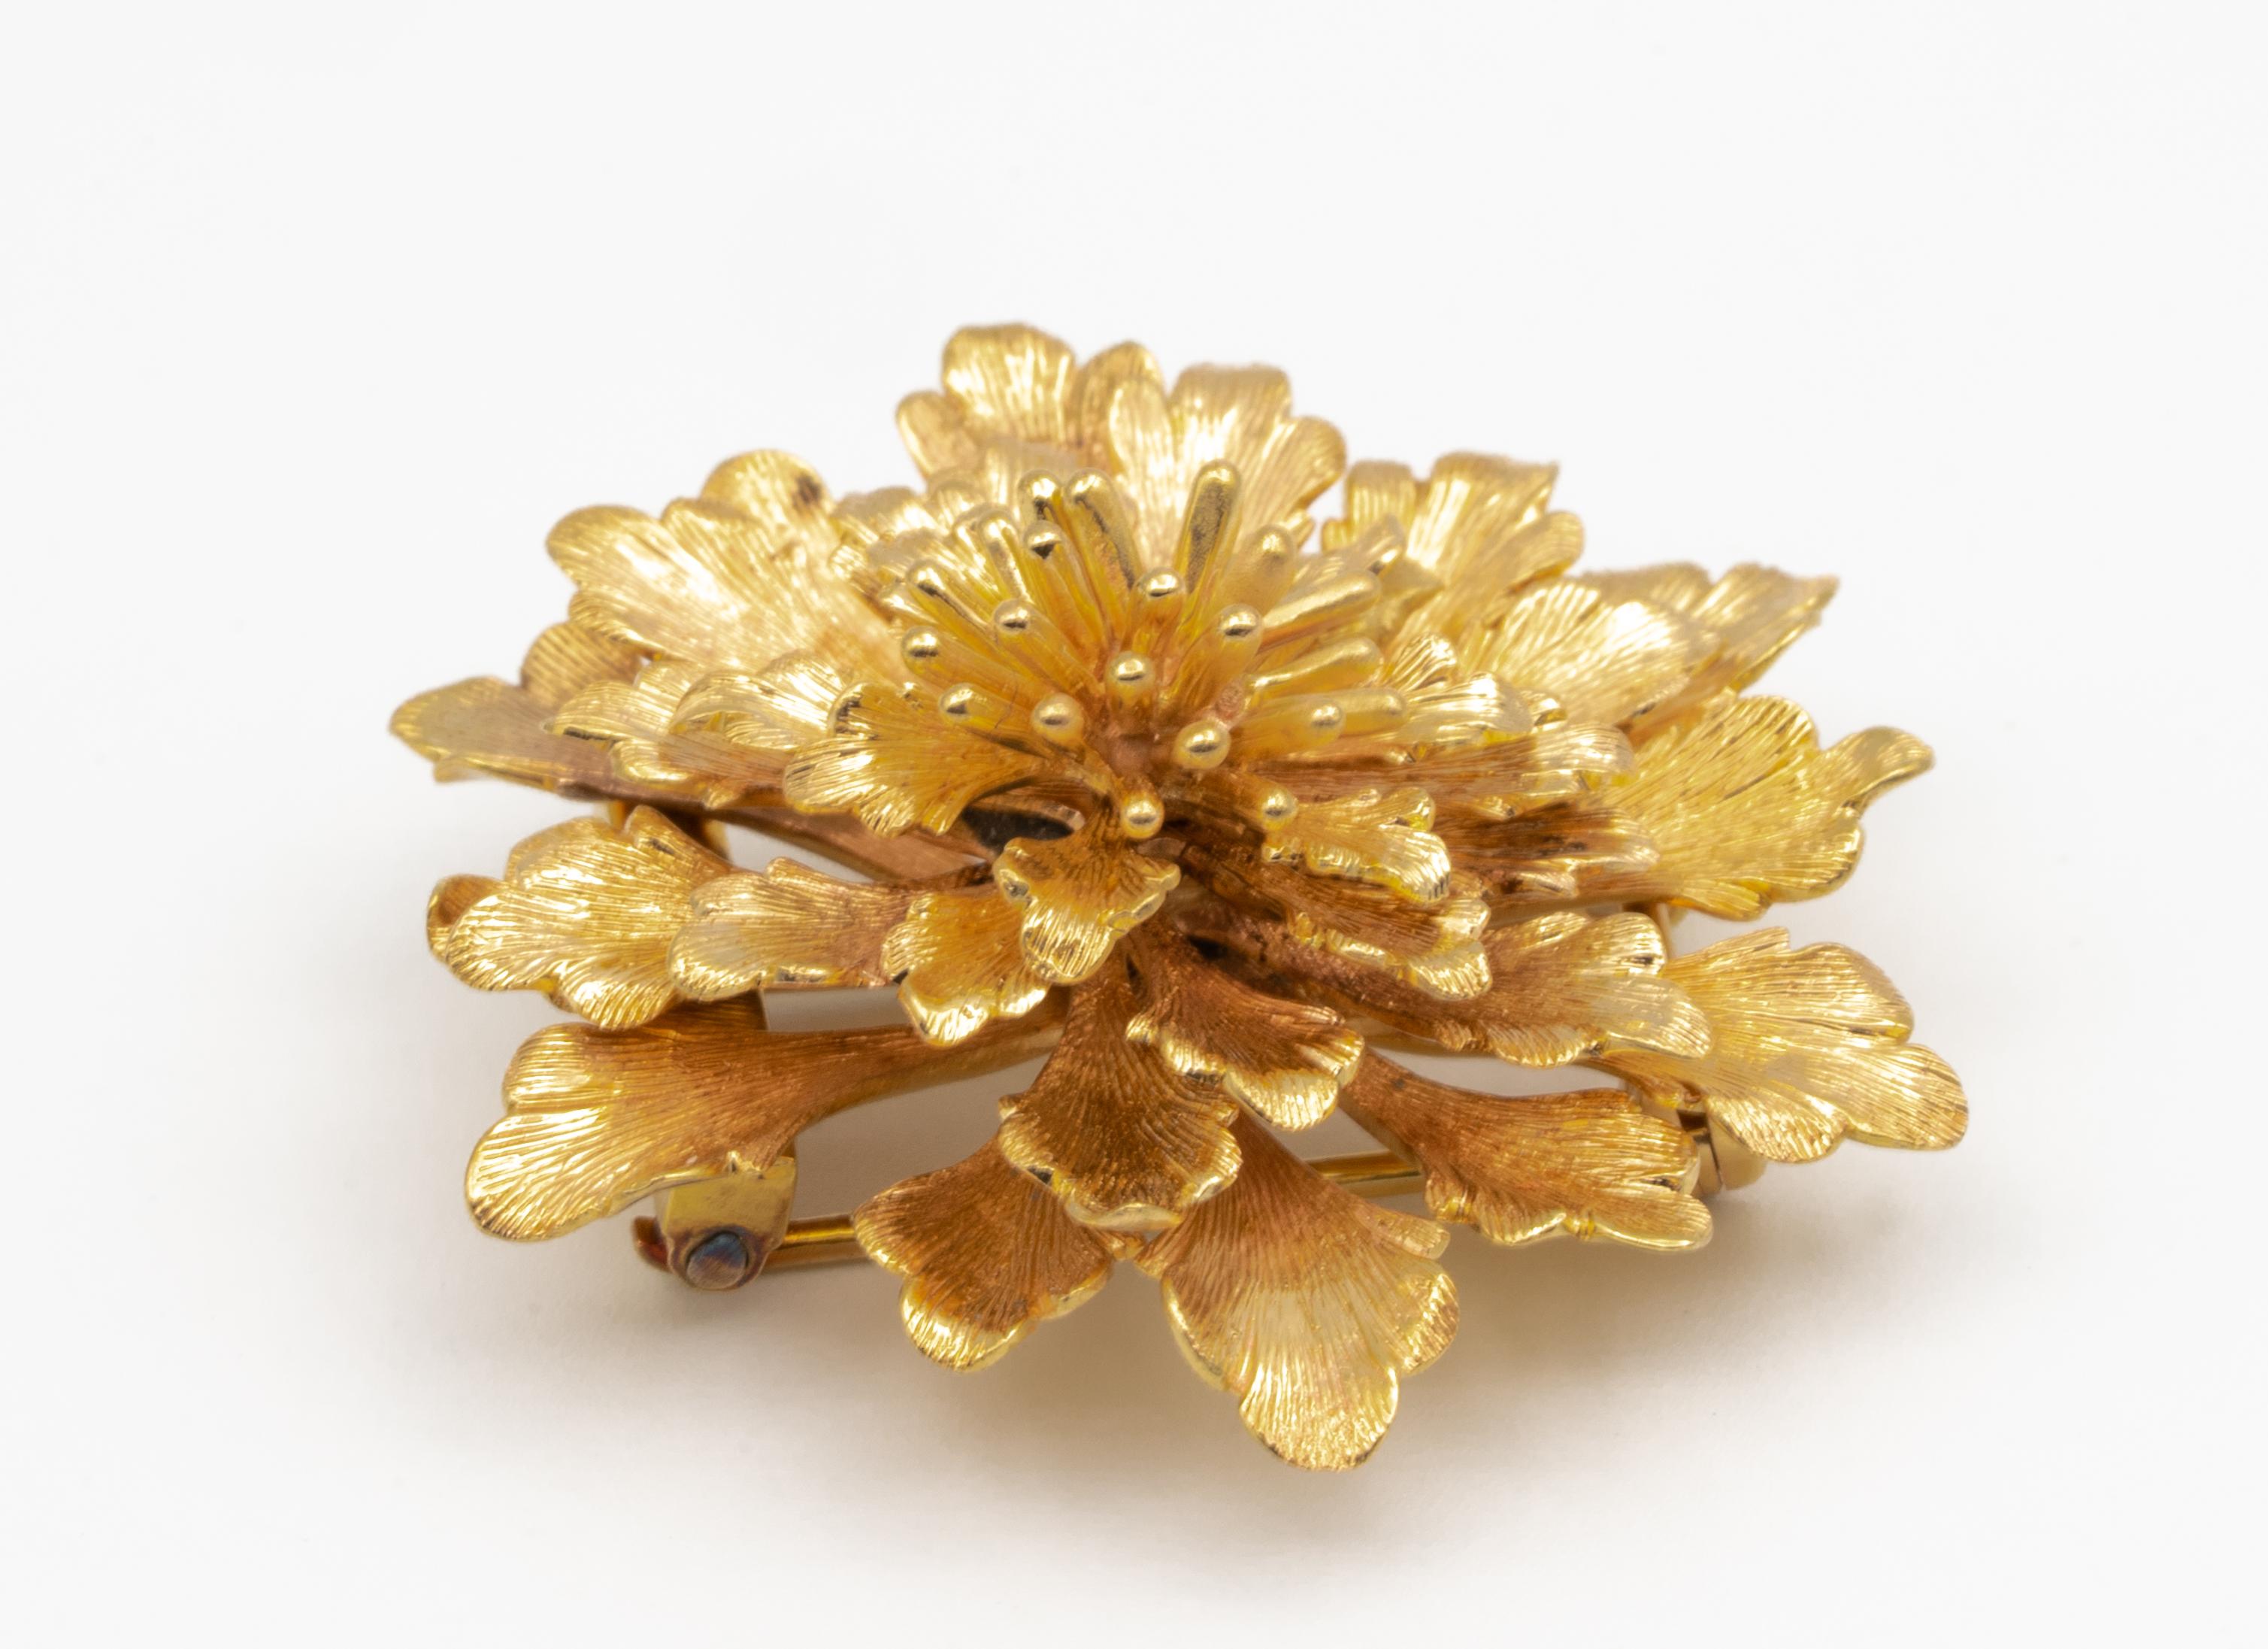 Vintage Cartier Gold Flower Clip-Brooch finely crafted in 14 Karat gold, signed by Cartier with approximate weight of 15.5 grams. The brooch has a double pin closure.

Stamp: CARTIER 14K
Weight: 15.5 grams